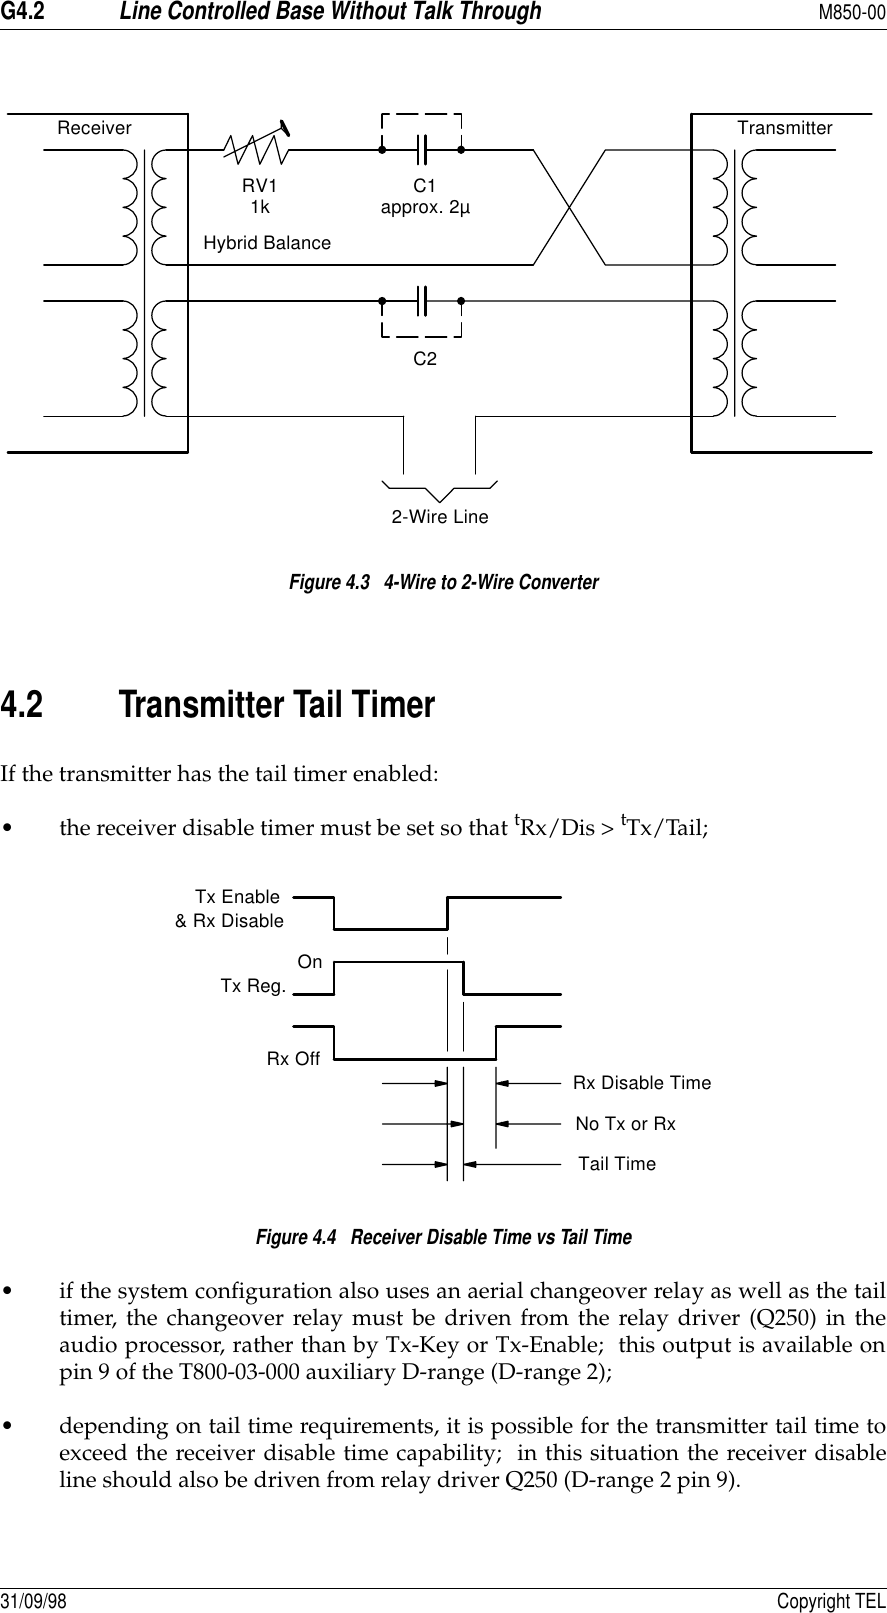 G4.2Line Controlled Base Without Talk ThroughM850-0031/09/98 Copyright TELFigure 4.3   4-Wire to 2-Wire Converter4.2 Transmitter Tail TimerIf the transmitter has the tail timer enabled:• the receiver disable timer must be set so that tRx/Dis &gt; tTx/Tail;Figure 4.4   Receiver Disable Time vs Tail Time• if the system configuration also uses an aerial changeover relay as well as the tailtimer, the changeover relay must be driven from the relay driver (Q250) in theaudio processor, rather than by Tx-Key or Tx-Enable;  this output is available onpin 9 of the T800-03-000 auxiliary D-range (D-range 2);• depending on tail time requirements, it is possible for the transmitter tail time toexceed the receiver disable time capability;  in this situation the receiver disableline should also be driven from relay driver Q250 (D-range 2 pin 9).2-Wire LineC1C2TransmitterReceiverRV1 approx. 2µHybrid Balance1kRx Disable TimeNo Tx or RxTail TimeOnTx Reg.Rx OffTx Enable&amp; Rx Disable